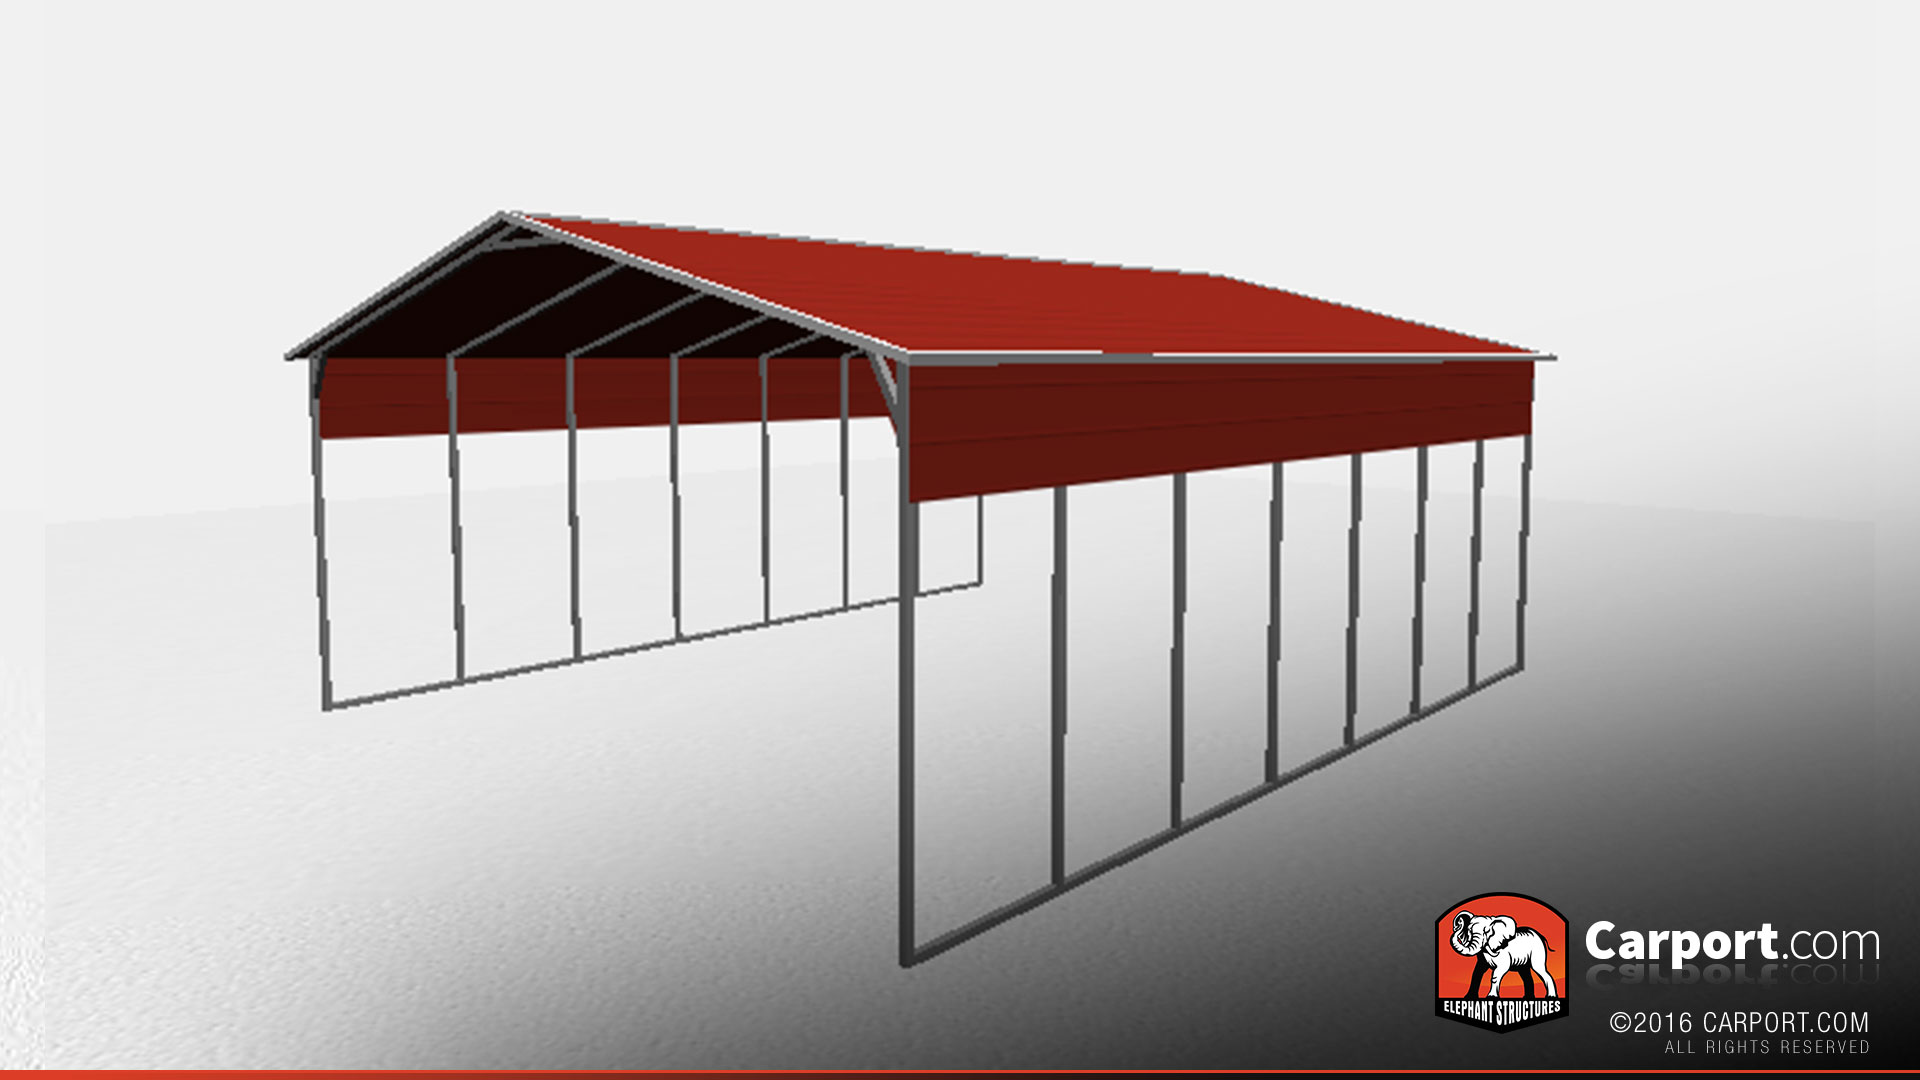 26 X 36 Open Steel Carport With A Frame Roof Steel Carports Info